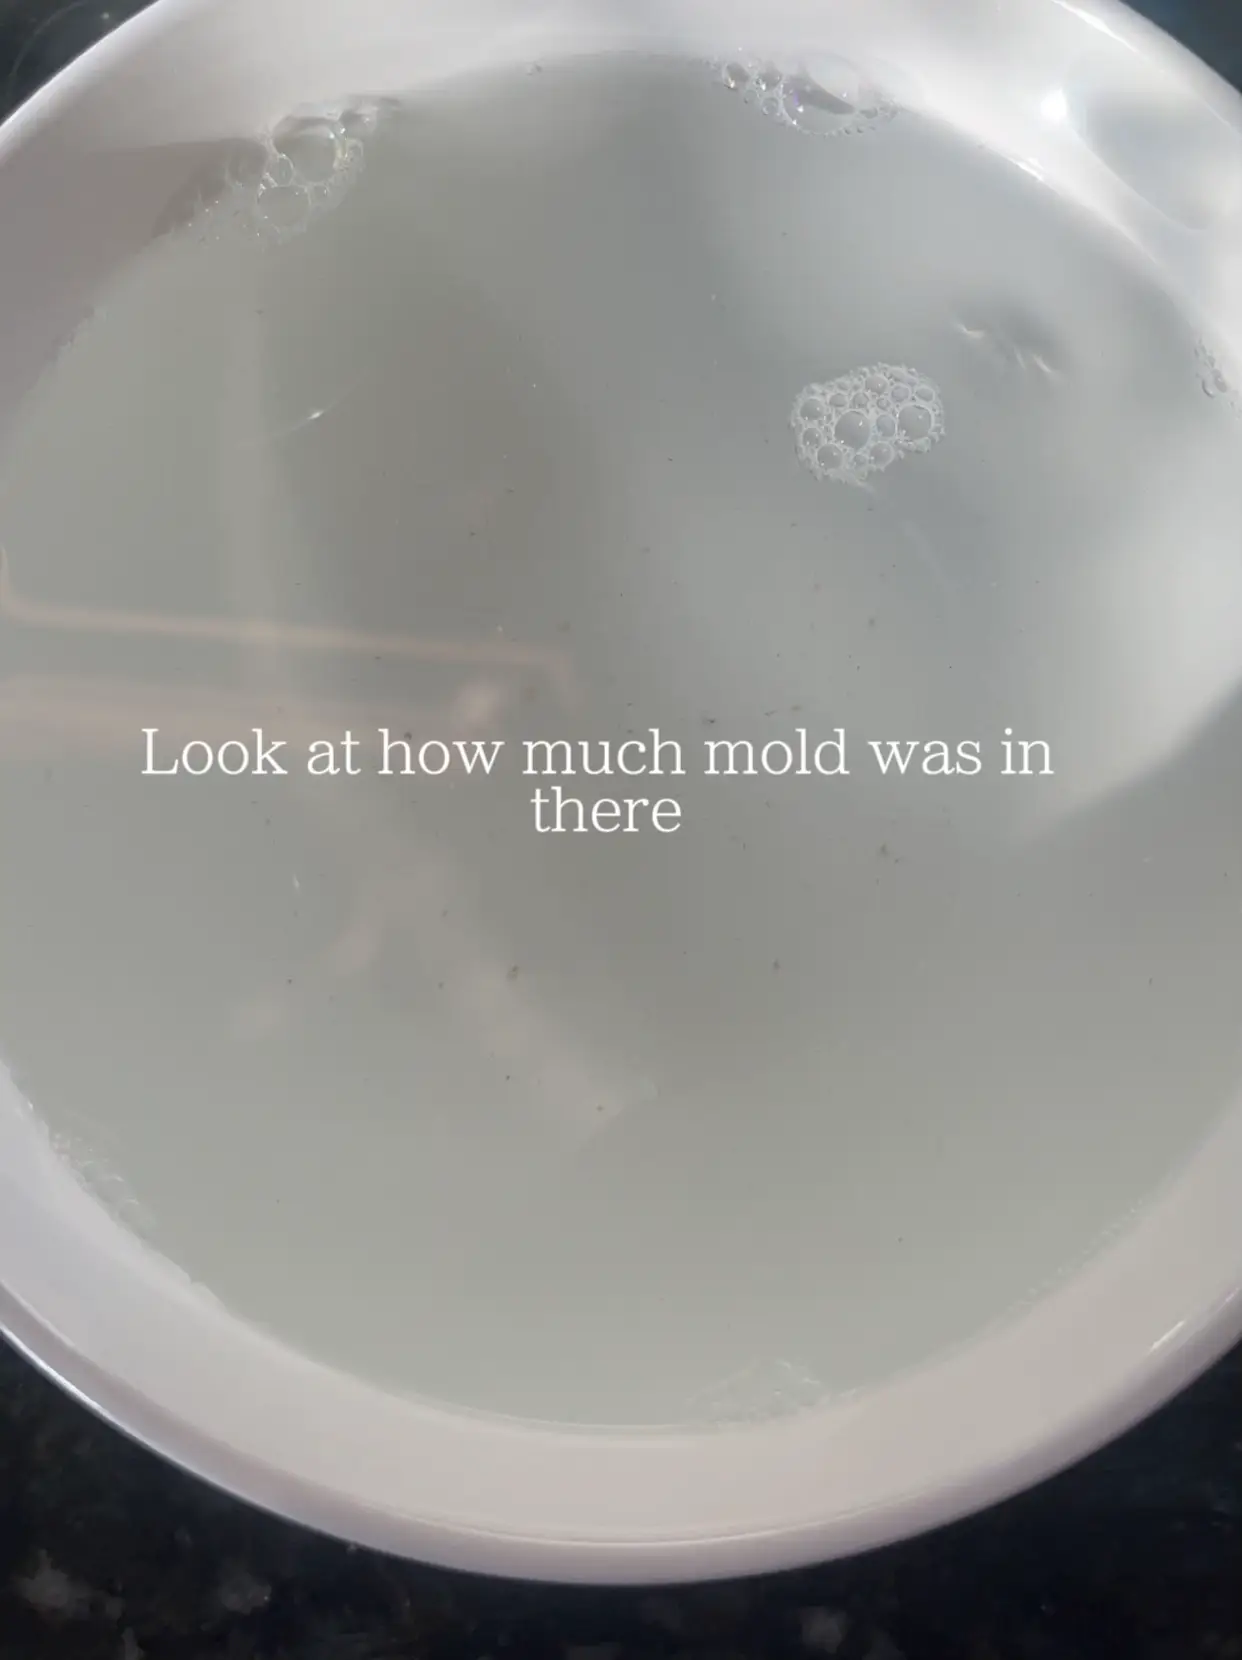 How to clean your Stanley Cup properly to avoid mold